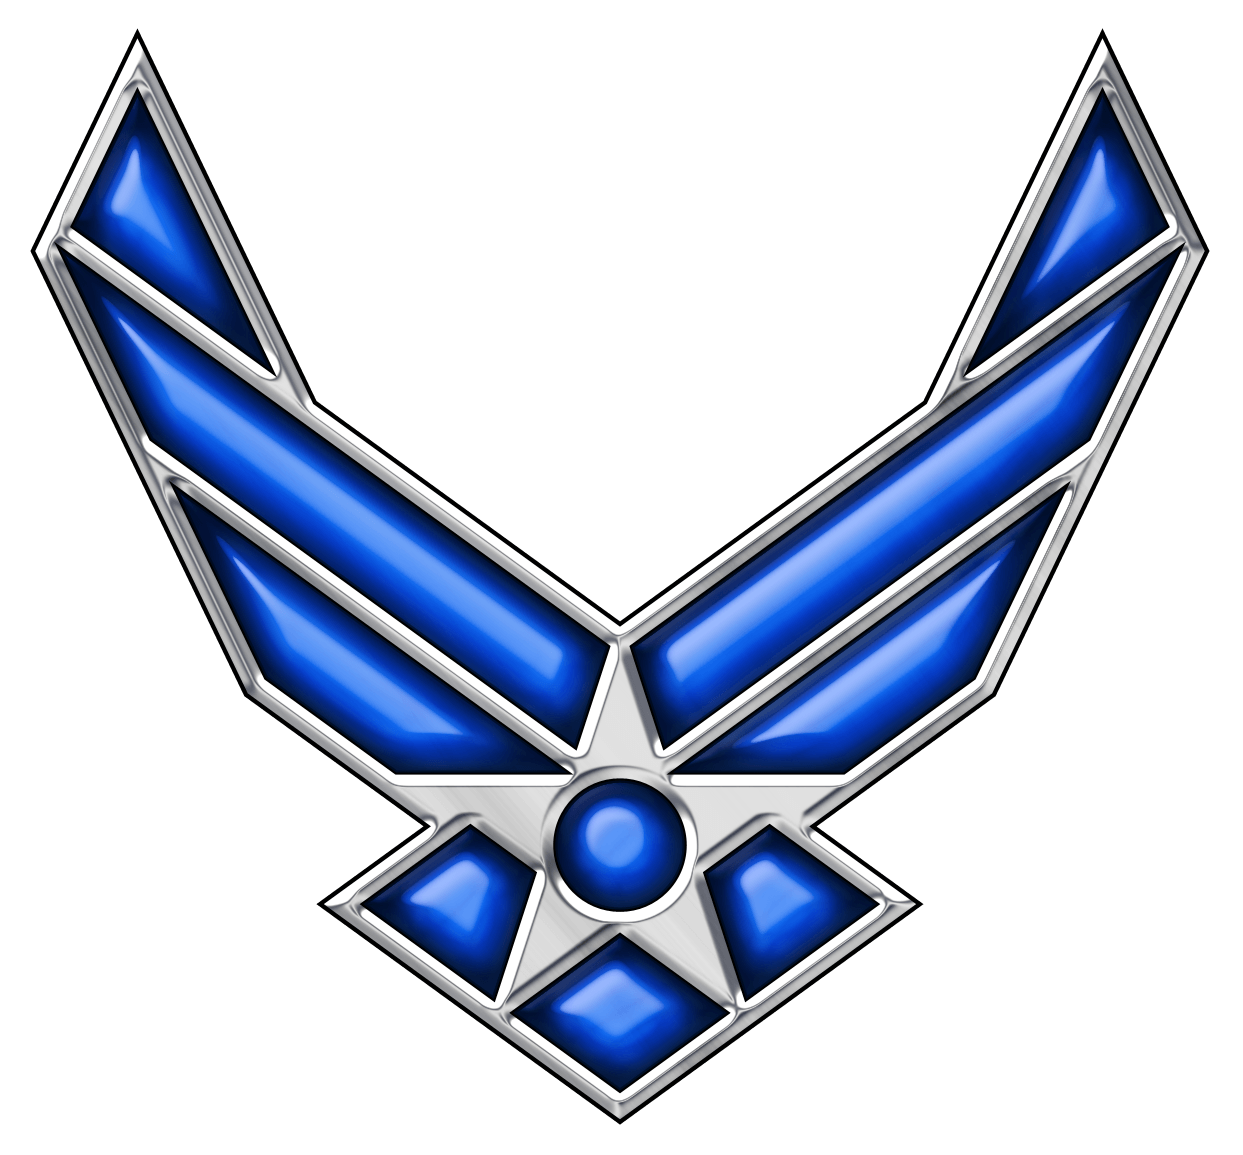 Air Force JROTC Logo - Air Force Logo Transparent PNG Pictures - Free Icons and PNG Backgrounds